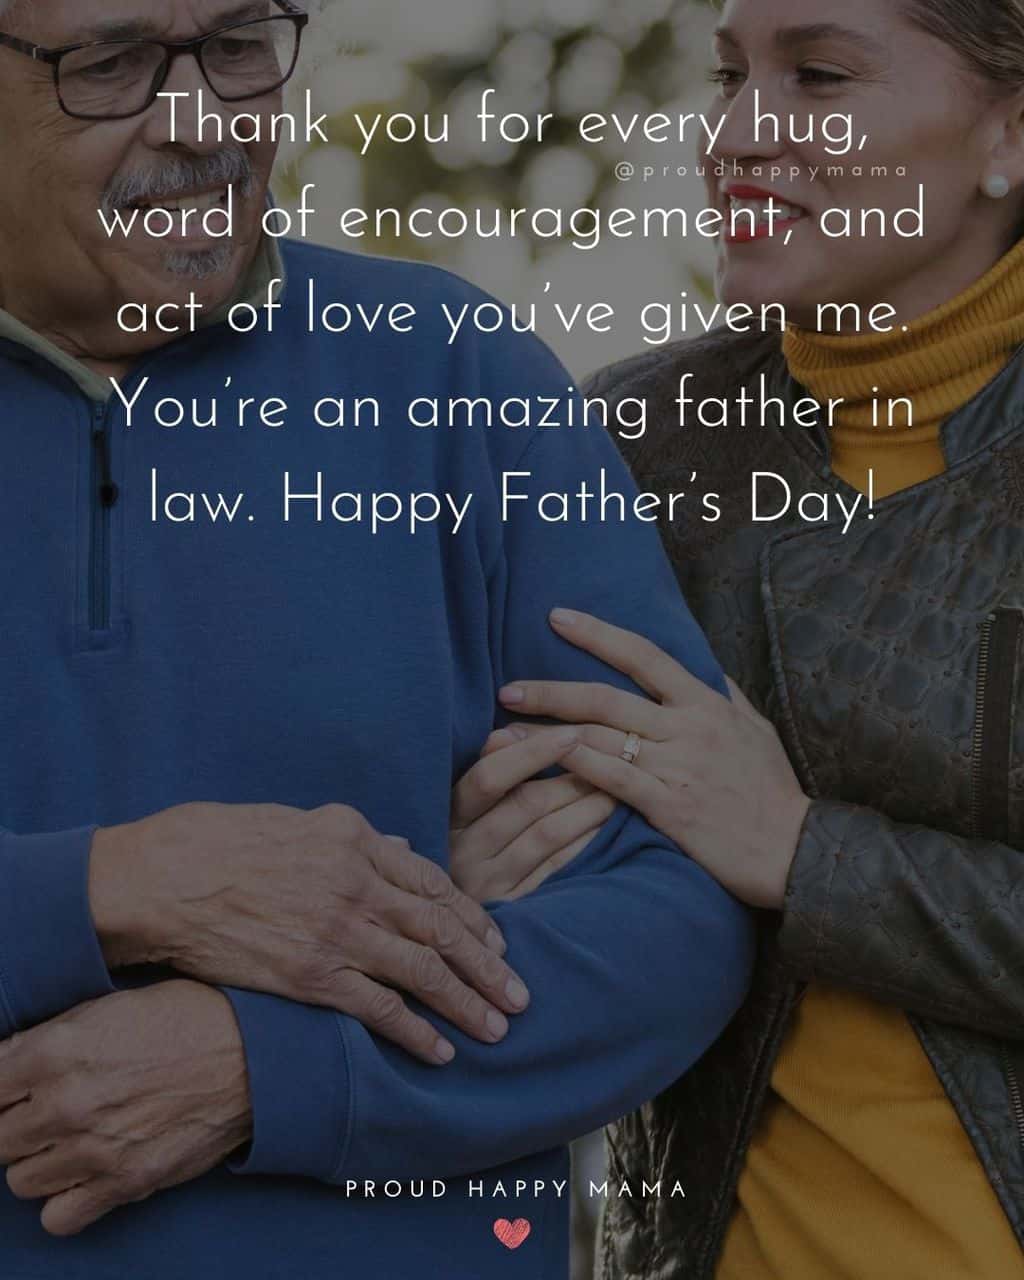 Happy Fathers Day Quotes For Father In Law - Thank you for every hug, word of encouragement, and act of love you’ve given